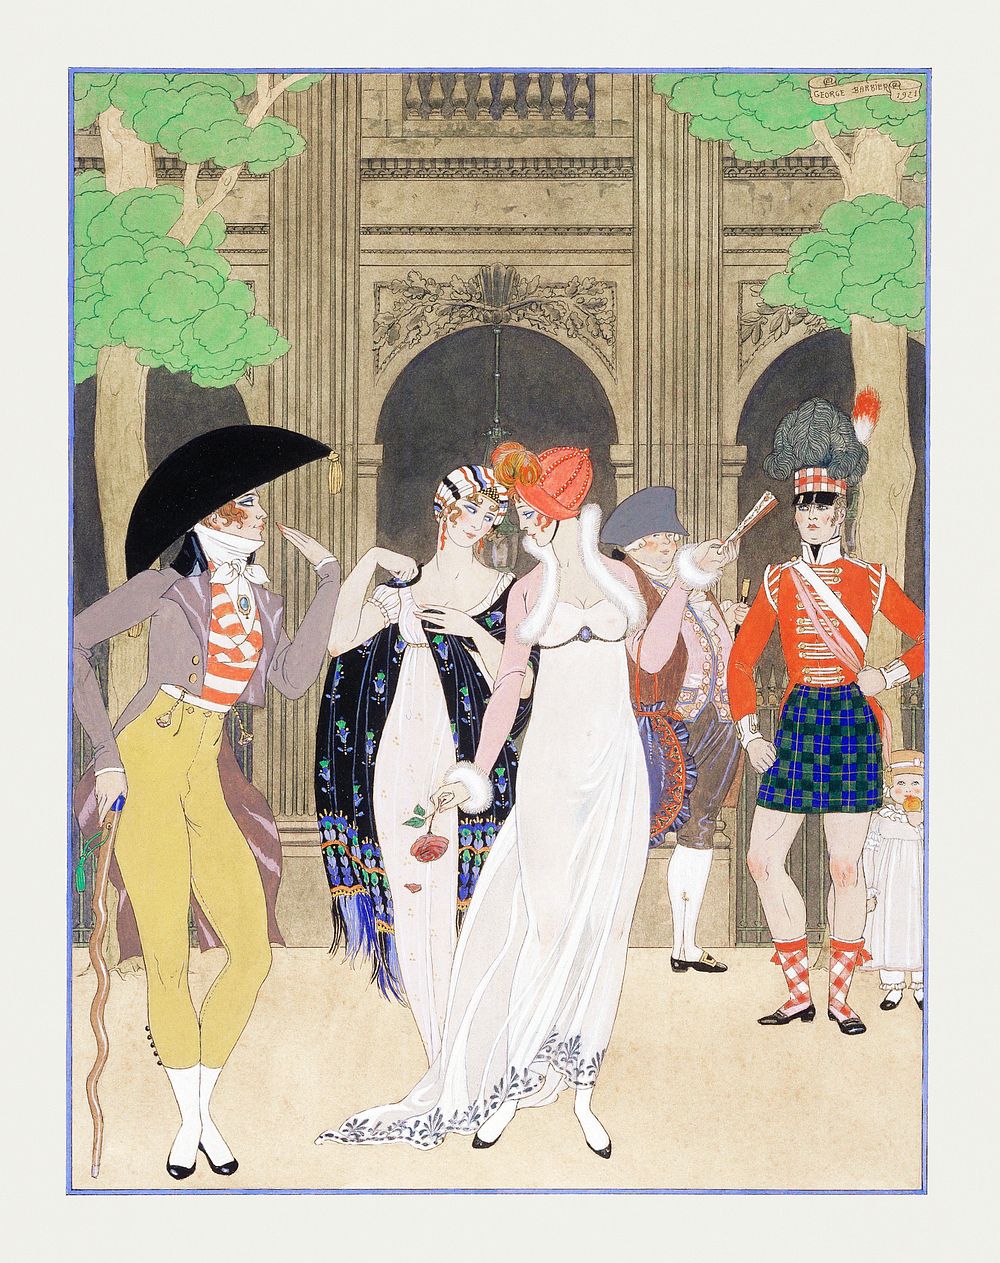 La Merveilleuse au Palais Royal (1921) fashion illustration in high resolution by George Barbier. Original from The…